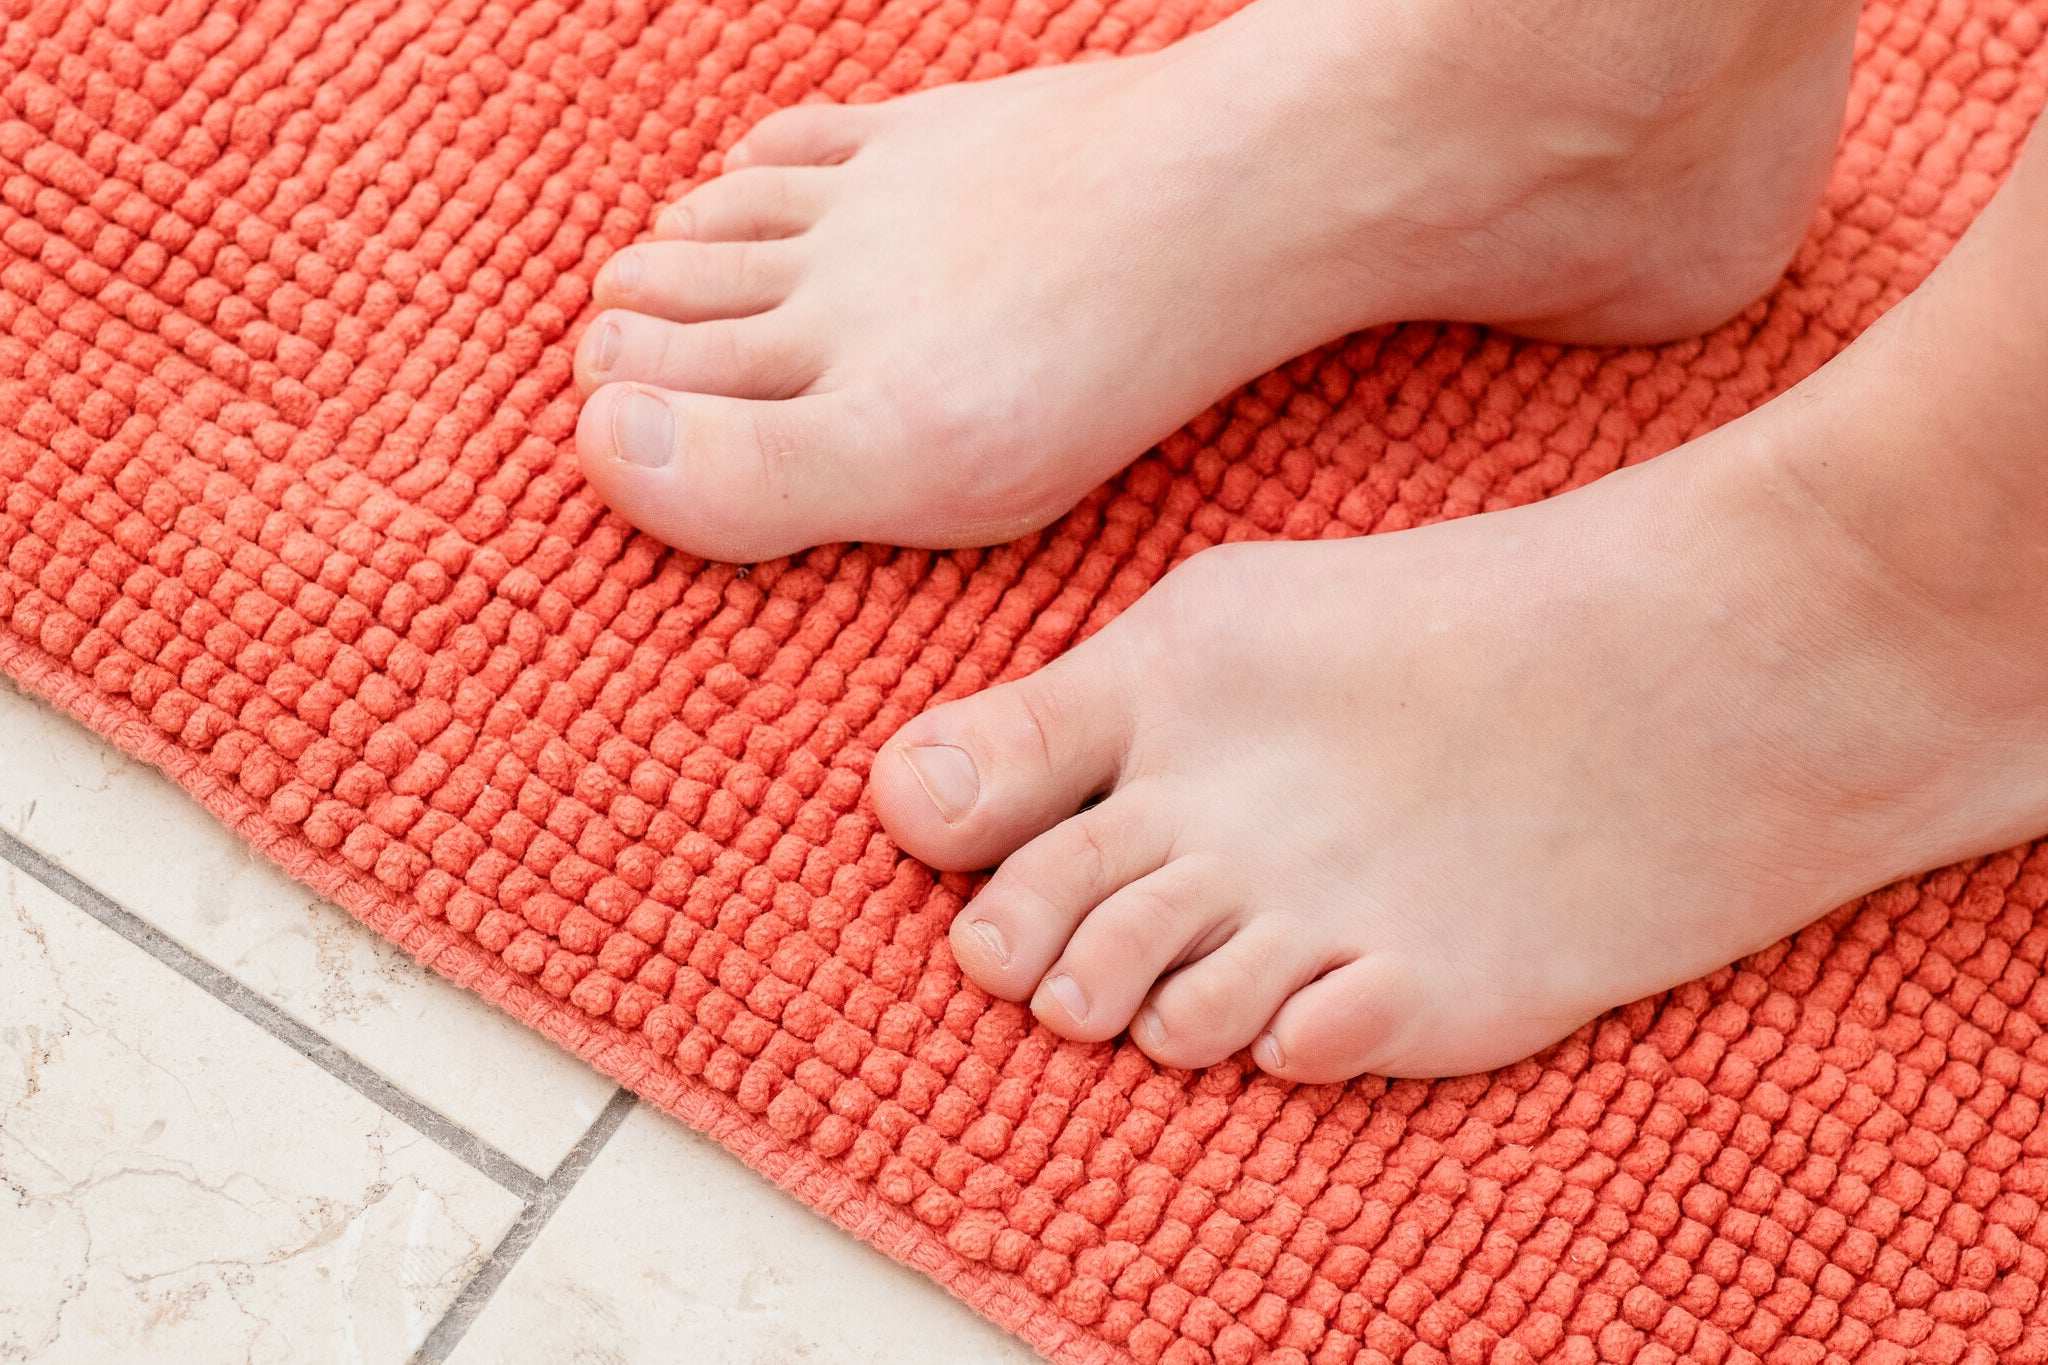 How To Clean A Rubber Bath Mat In A Washing Machine